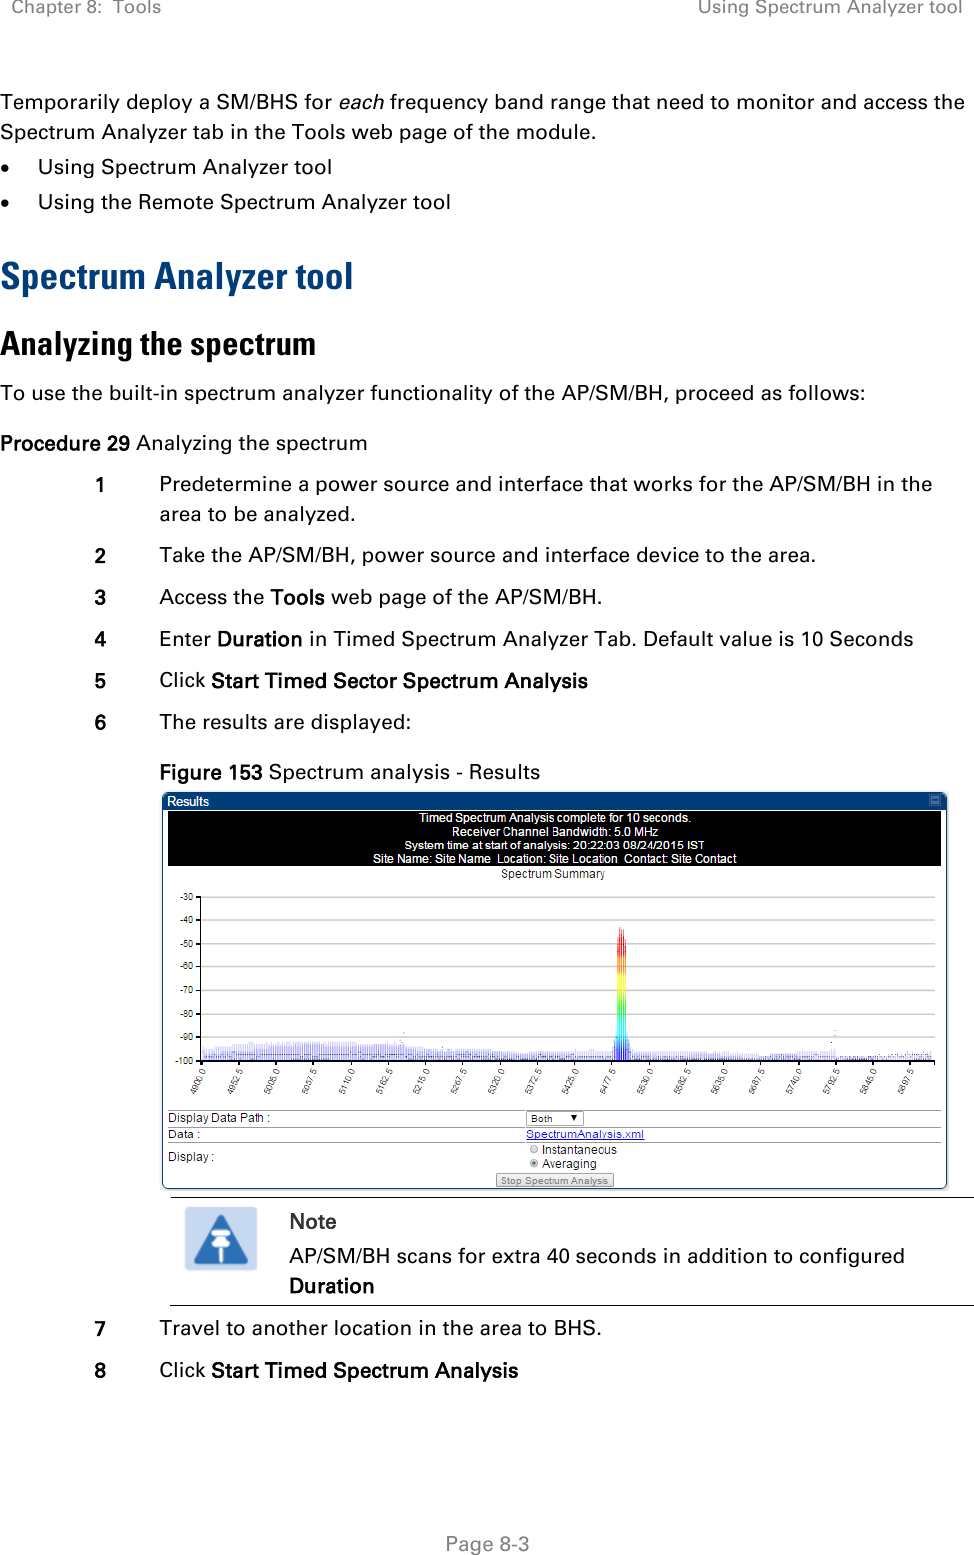 Chapter 8:  Tools Using Spectrum Analyzer tool   Page 8-3 Temporarily deploy a SM/BHS for each frequency band range that need to monitor and access the Spectrum Analyzer tab in the Tools web page of the module.   Using Spectrum Analyzer tool  Using the Remote Spectrum Analyzer tool Spectrum Analyzer tool Analyzing the spectrum To use the built-in spectrum analyzer functionality of the AP/SM/BH, proceed as follows: Procedure 29 Analyzing the spectrum 1 Predetermine a power source and interface that works for the AP/SM/BH in the area to be analyzed. 2 Take the AP/SM/BH, power source and interface device to the area. 3 Access the Tools web page of the AP/SM/BH. 4 Enter Duration in Timed Spectrum Analyzer Tab. Default value is 10 Seconds 5 Click Start Timed Sector Spectrum Analysis 6 The results are displayed: Figure 153 Spectrum analysis - Results   Note AP/SM/BH scans for extra 40 seconds in addition to configured Duration  7 Travel to another location in the area to BHS. 8 Click Start Timed Spectrum Analysis 